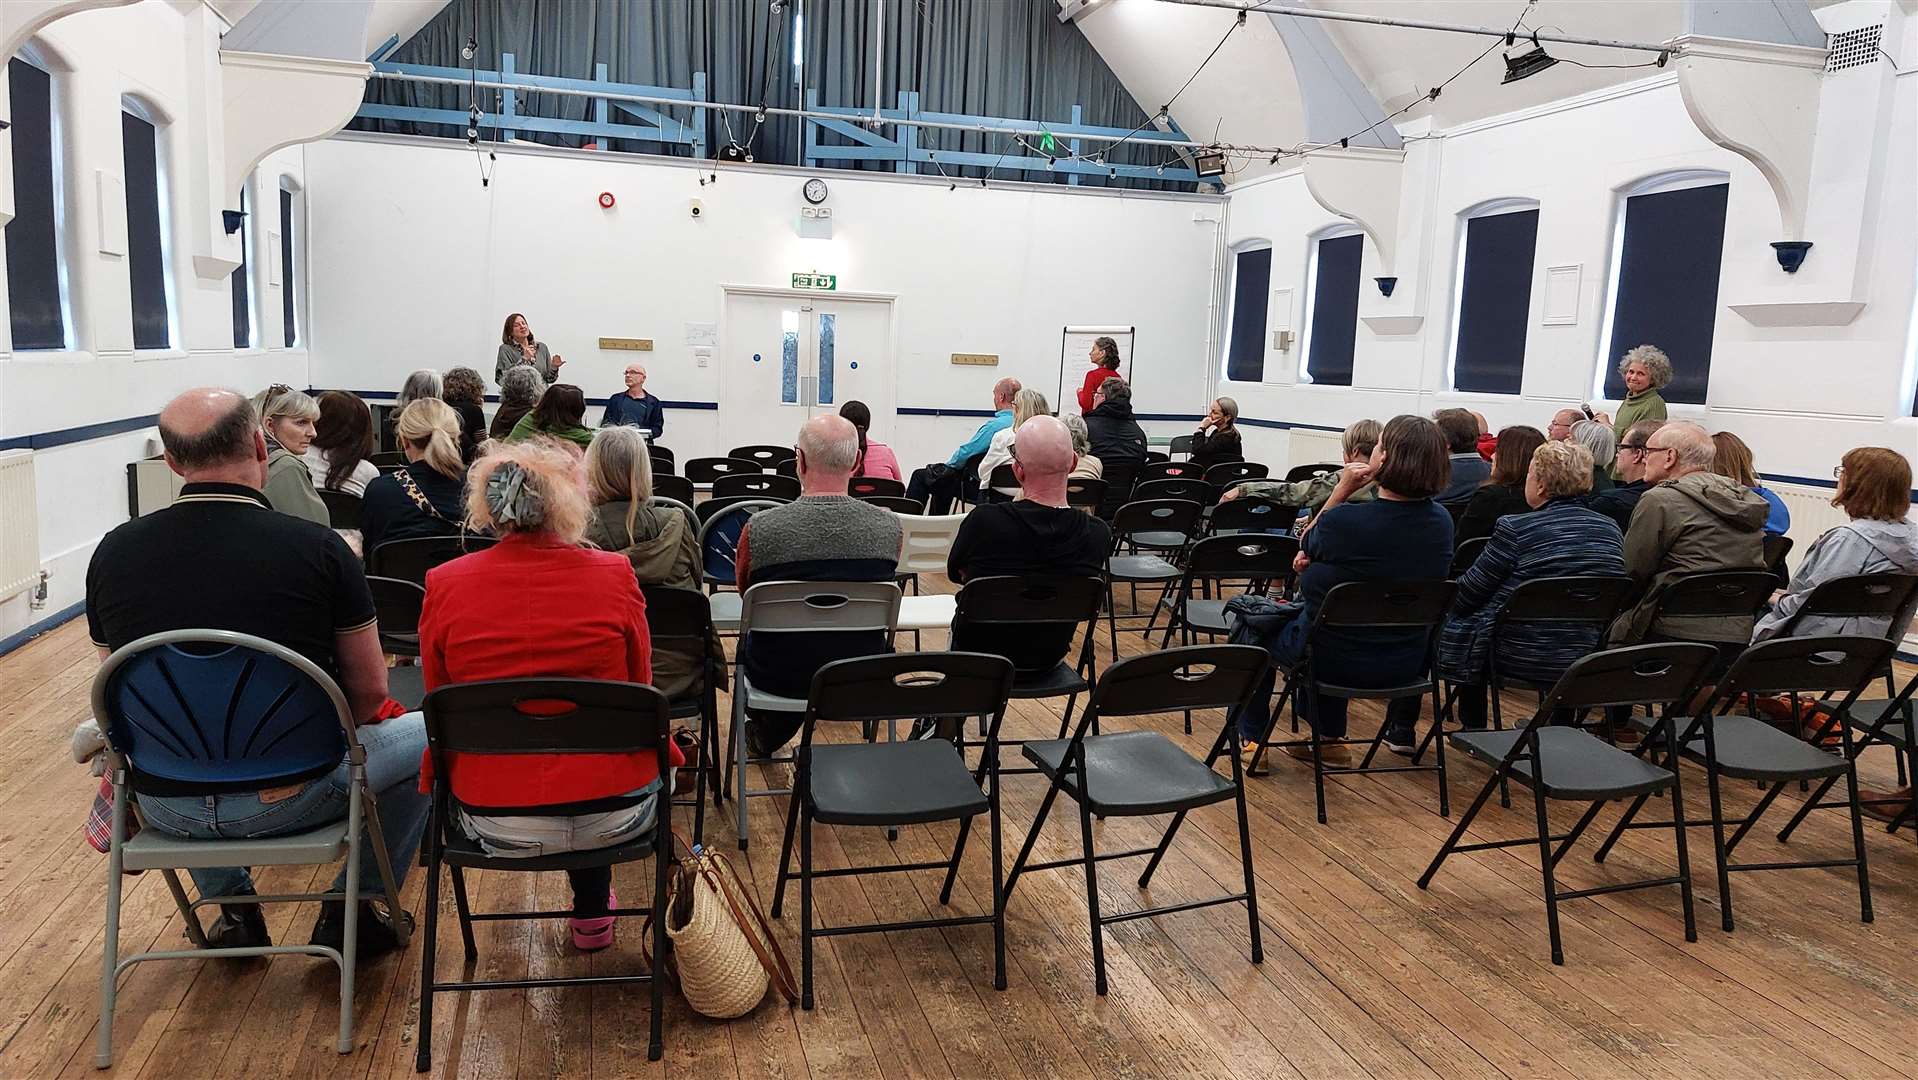 Residents in Whitstable attended a meeting at the Umbrella Centre to discuss the number of holiday lets in the town